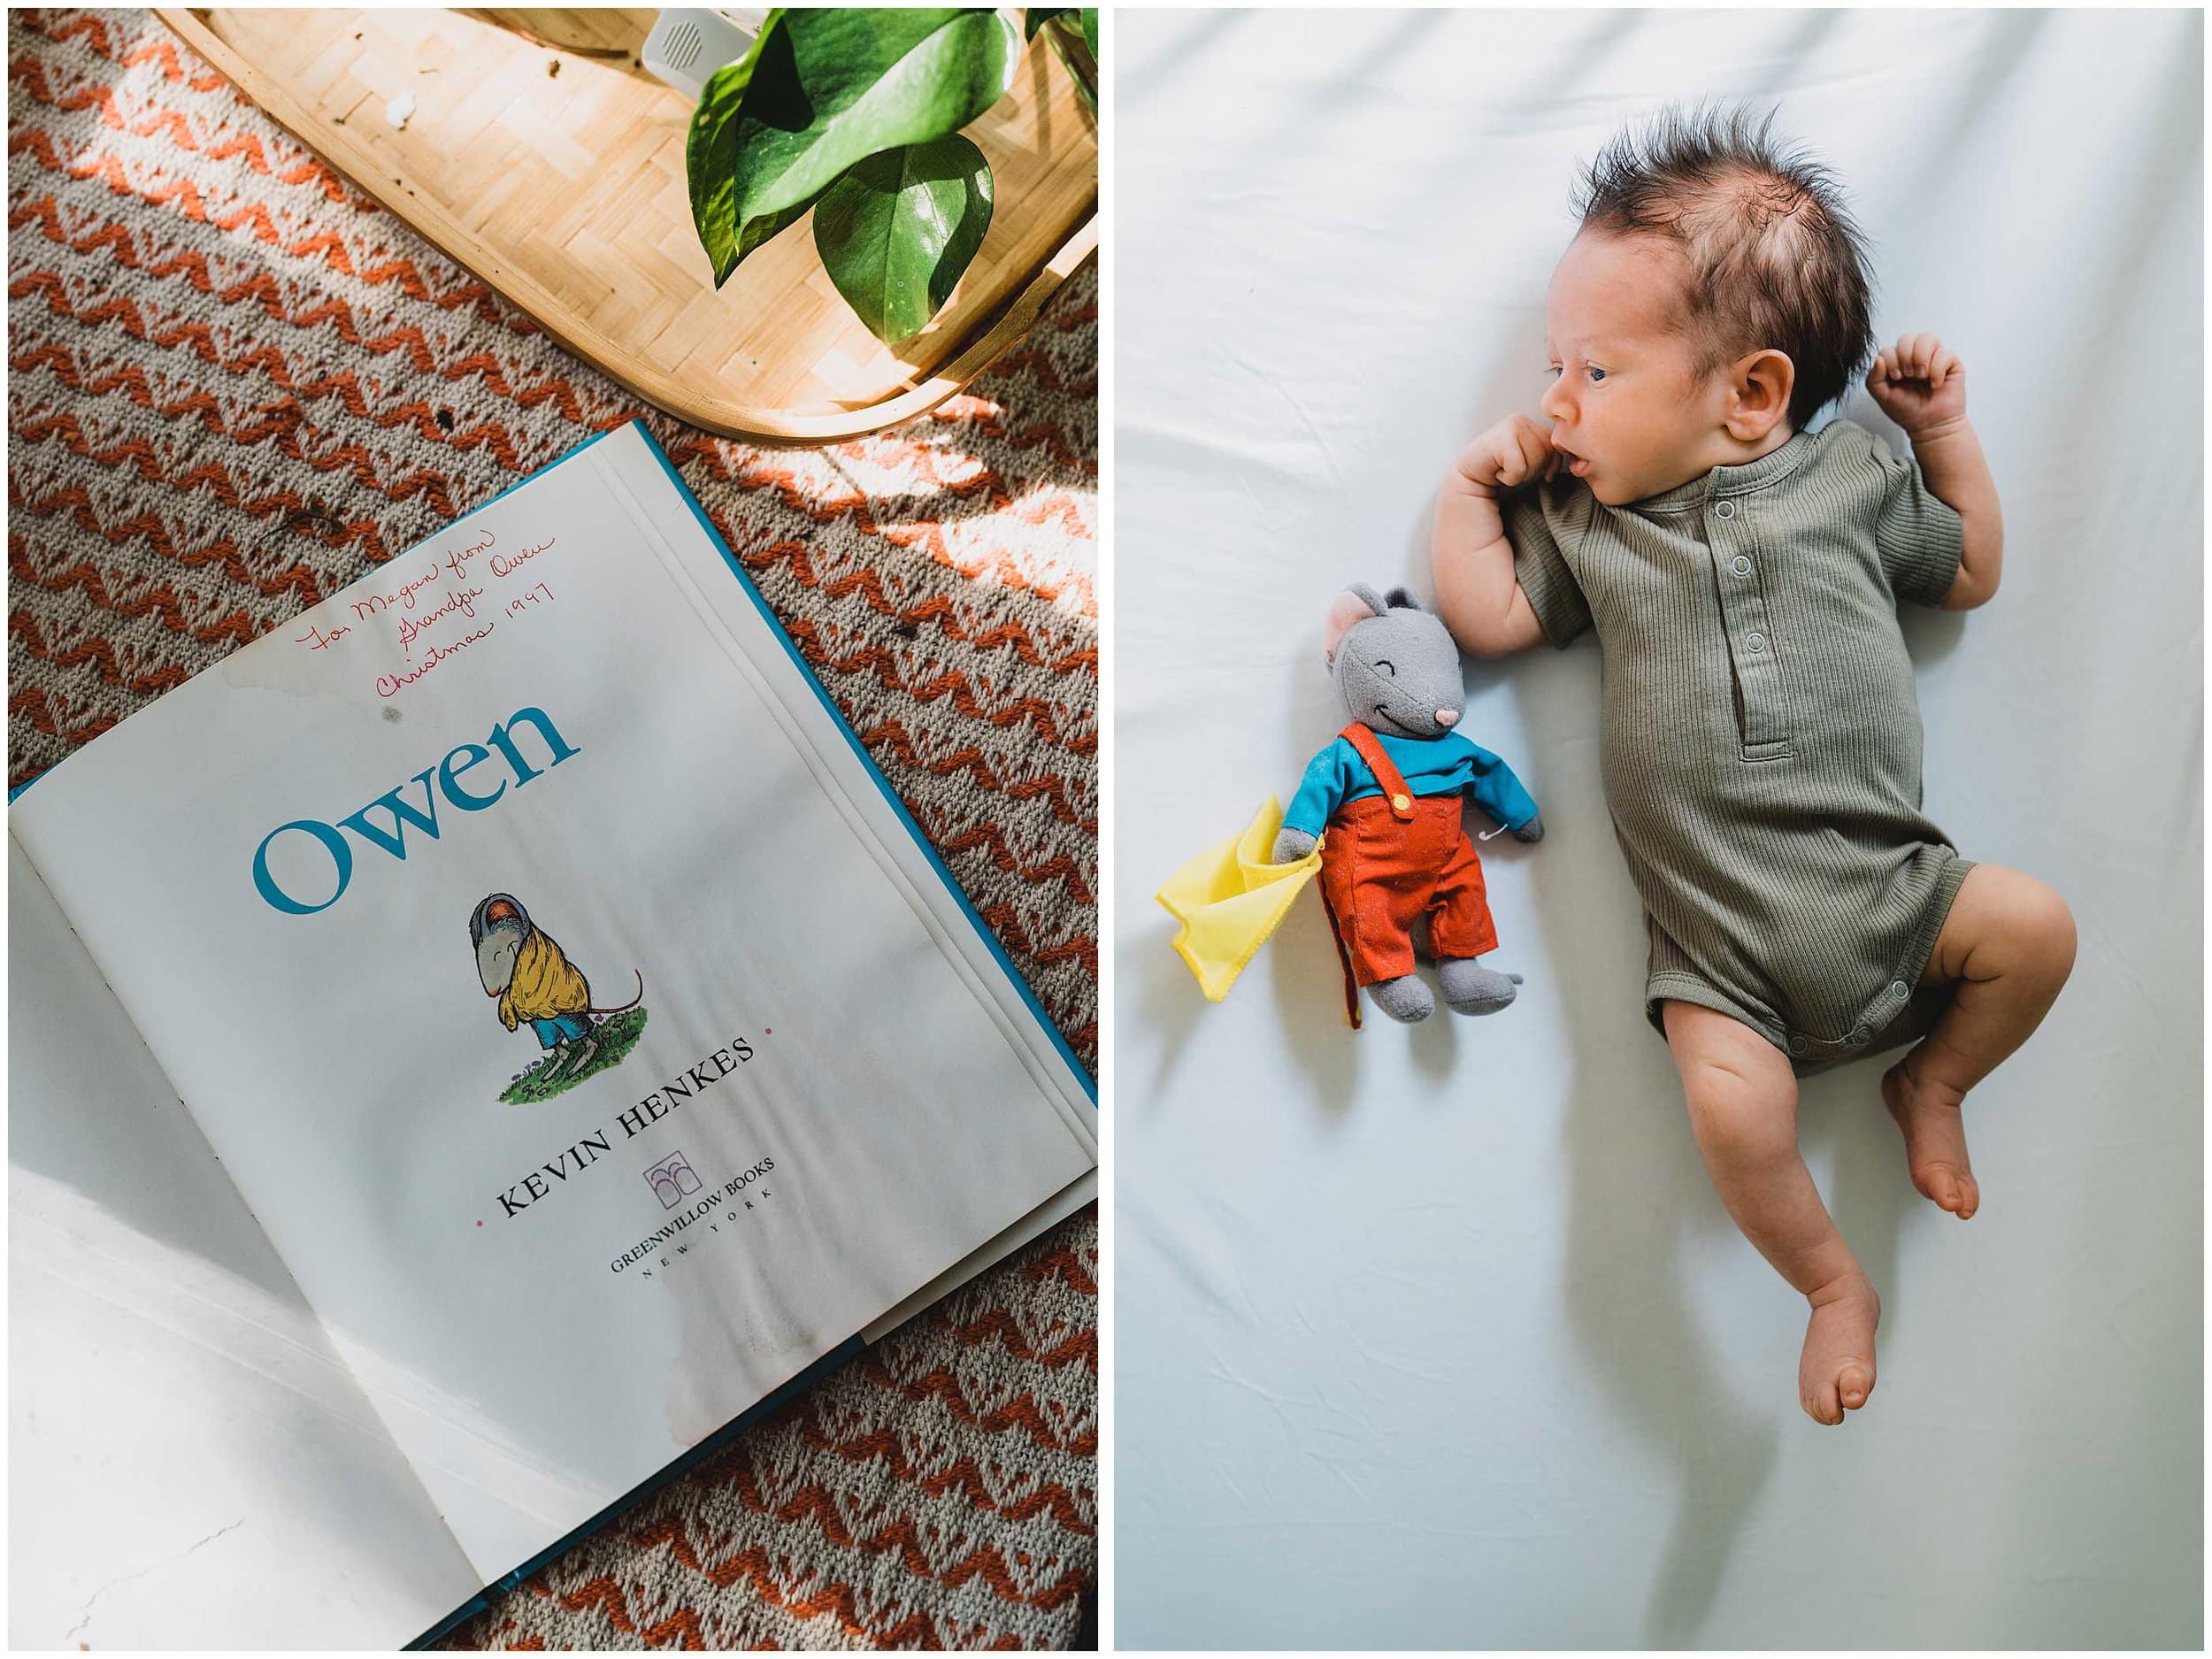 An image collage of a book called Owen on the left, and a baby in his crib on the right